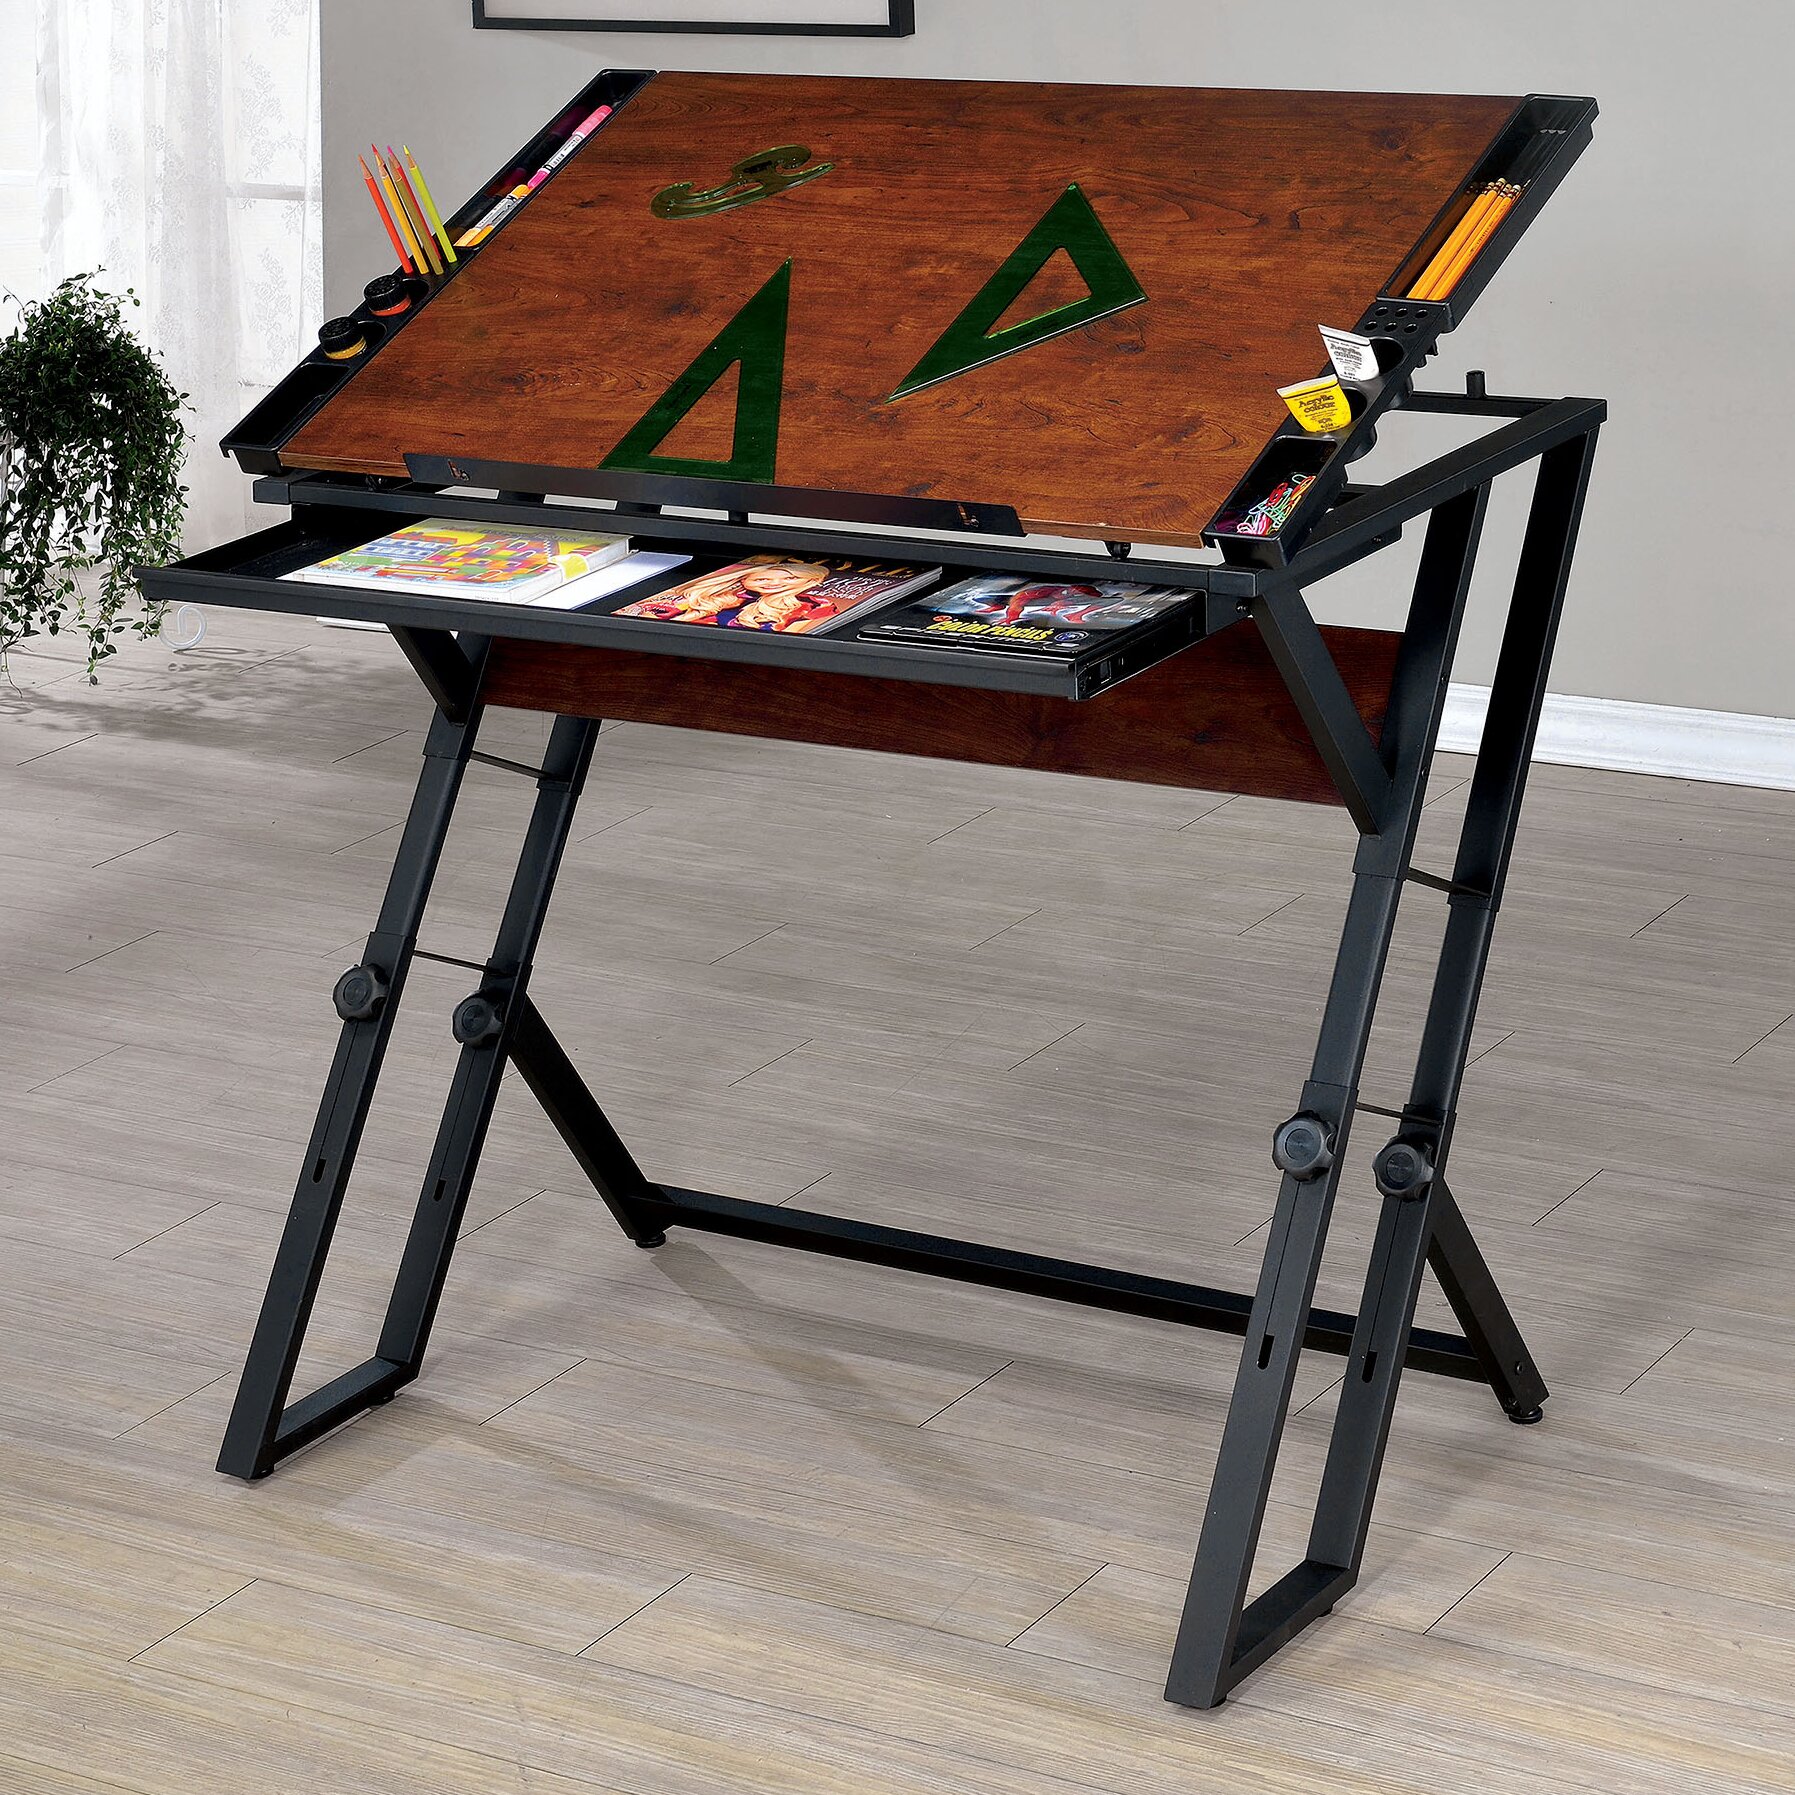 Wooden Drafting Table With Storage Pin On Art Studio Organization